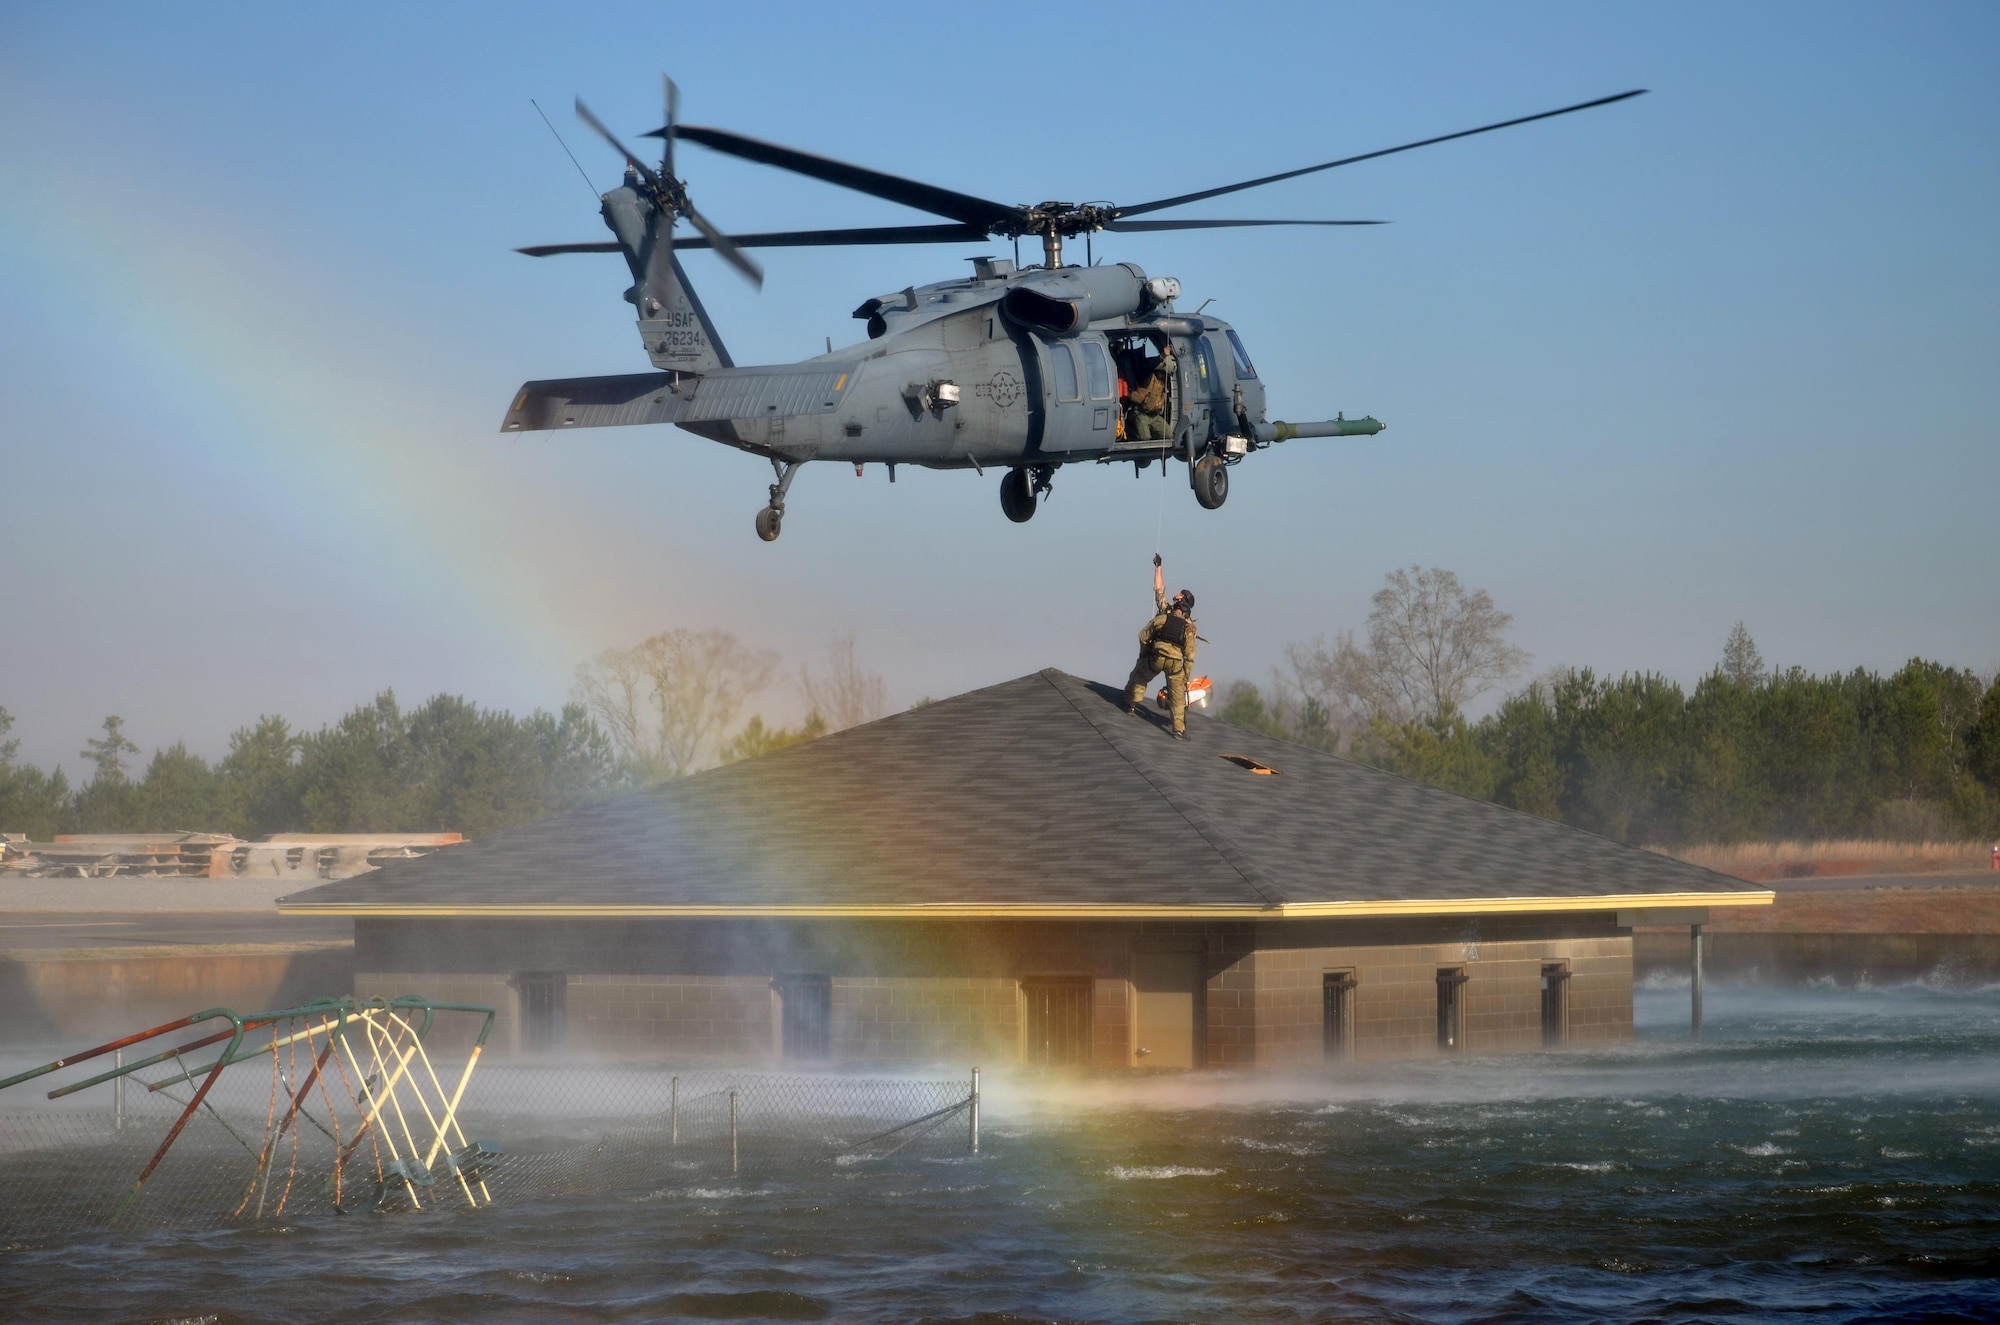 Pararescue jumpers and combat rescue officers conduct a search and rescue response during Hurricane Katrina-like flood training March 8, 2015, in Perry, Ga. The four-day exercise used HH-60 Pave Hawks and MV-22 Ospreys for simulated scenarios that included earthquake collapsed buildings, vehicle-borne improvised explosive devices detonating, and mass casualty responses. The pararescue jumpers and rescue officers are from the 920th Rescue Wing at Patrick Air Force Base, Fla. (U.S. Air Force photo/Staff Sgt. Kelly Goonan)